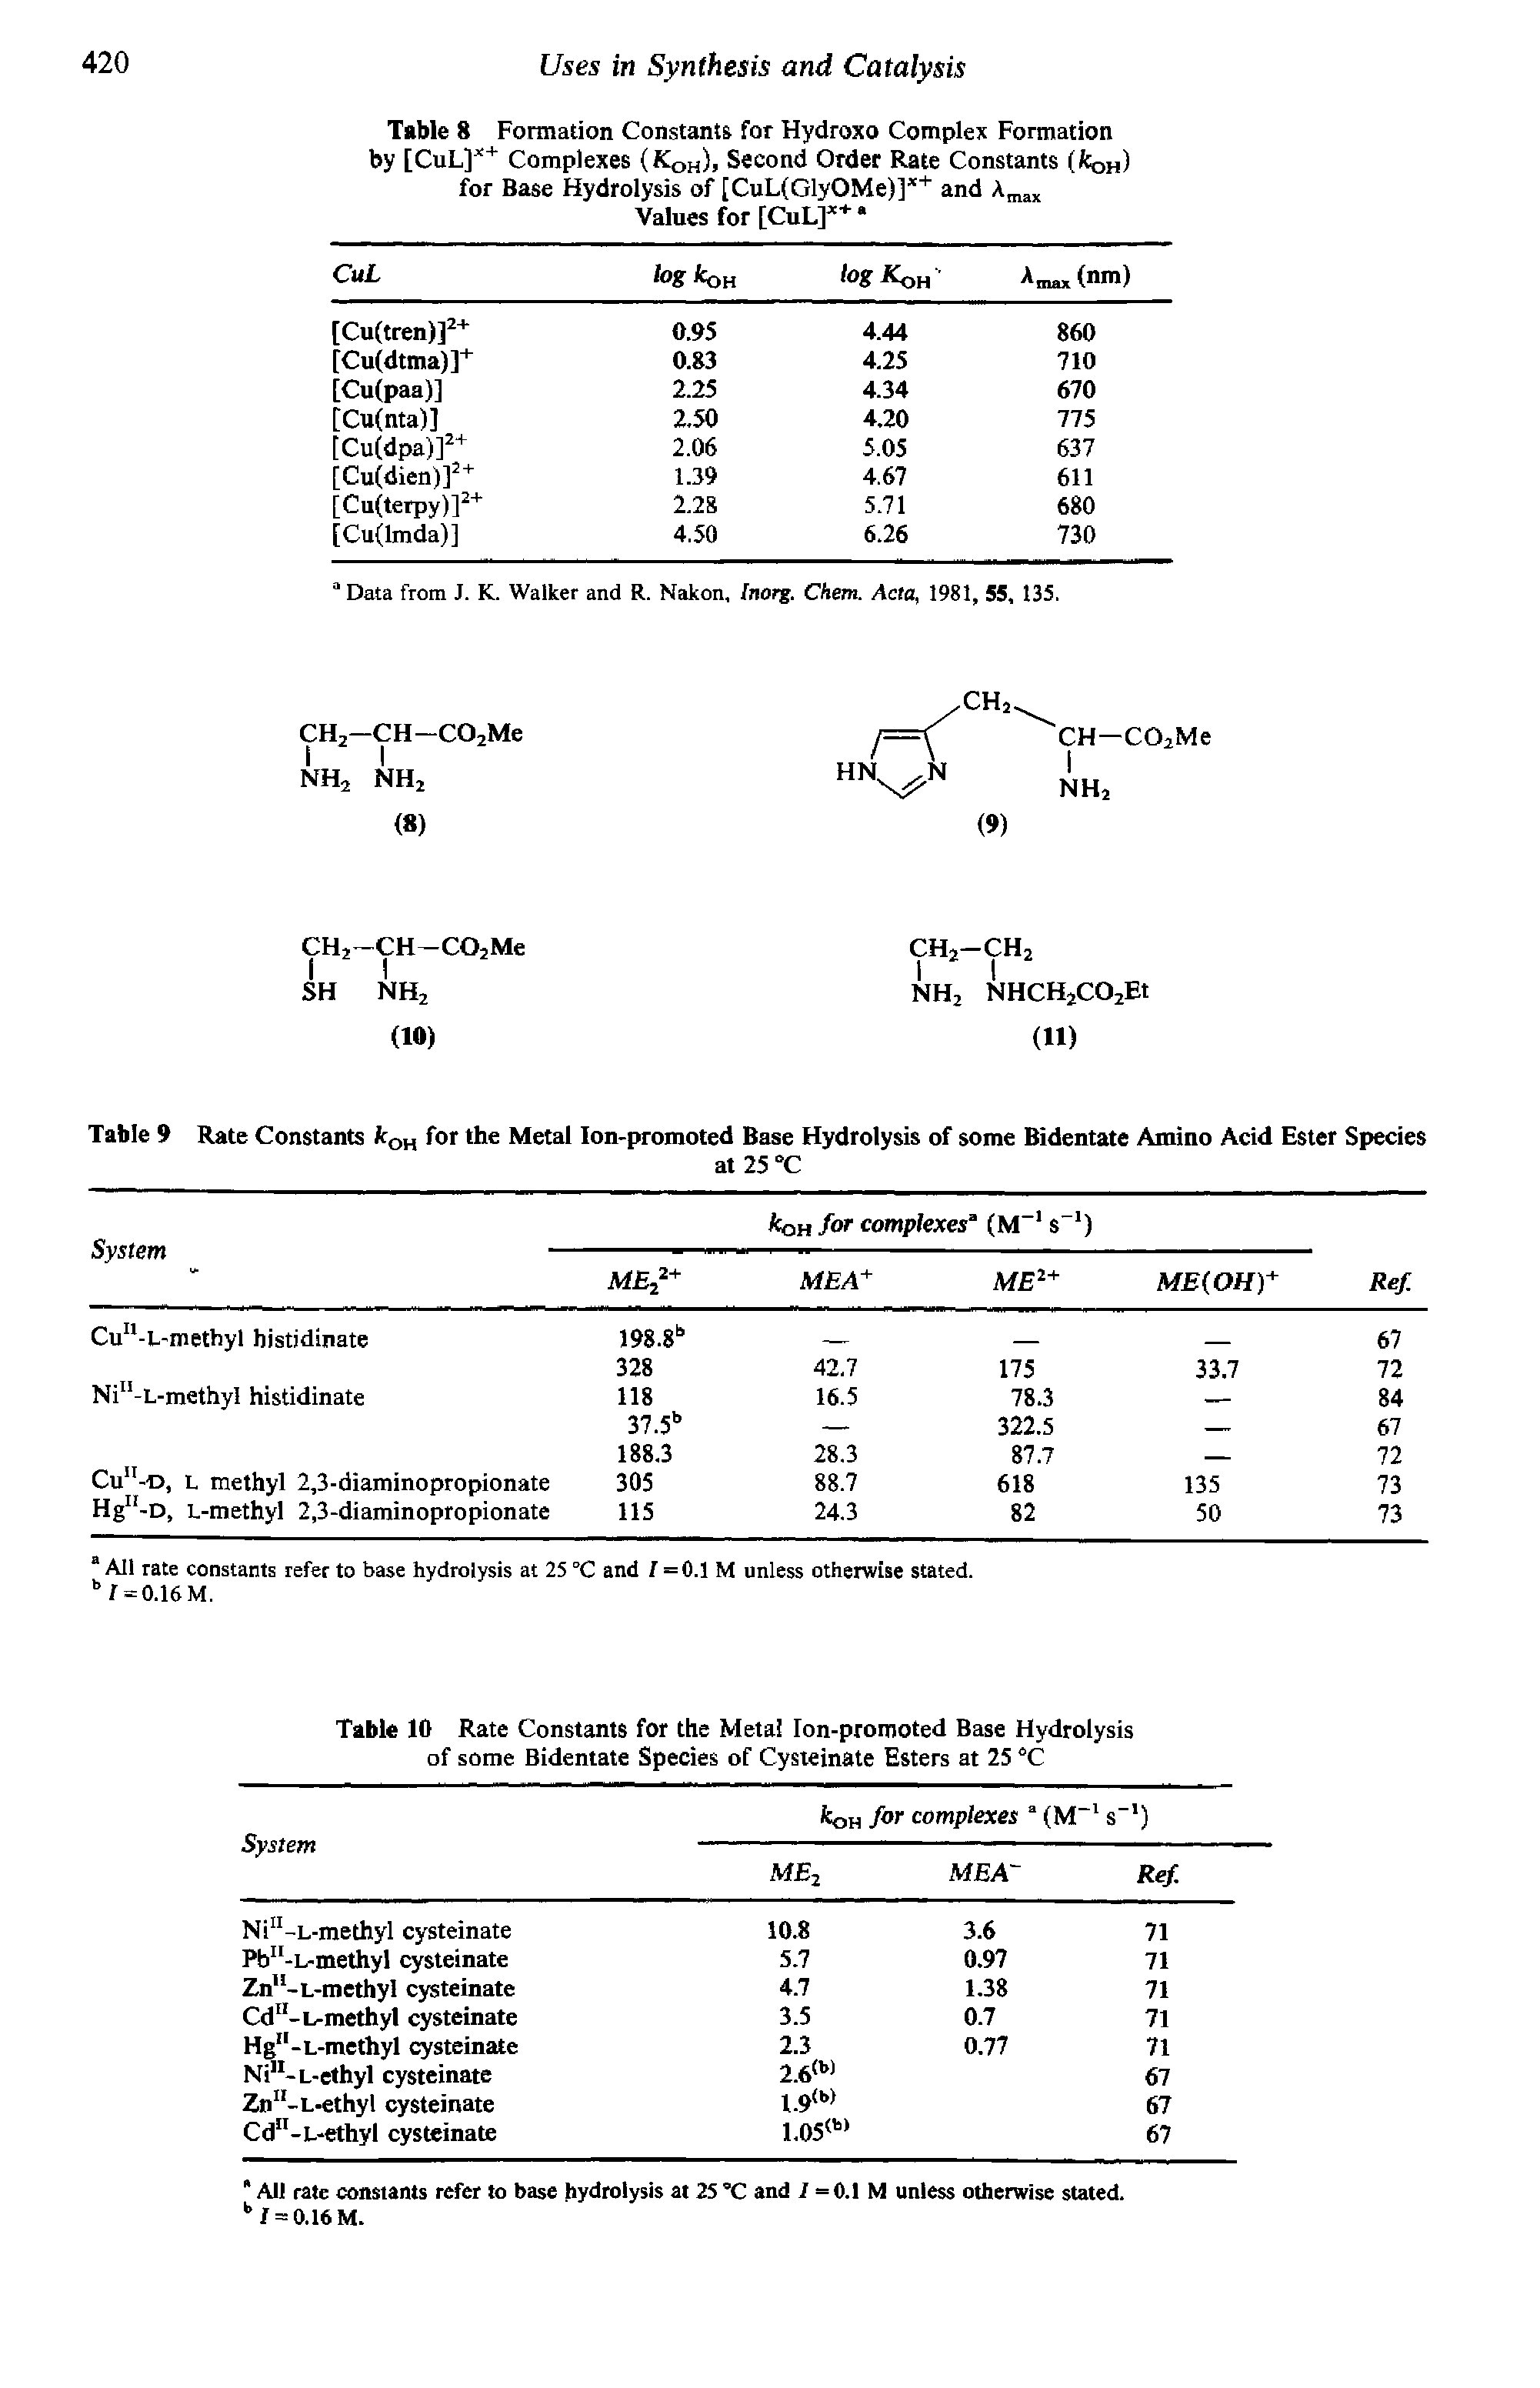 Table 10 Rate Constants for the Metal Ion-promoted Base Hydrolysis of some Bidentate Species of Cysteinate Esters at 25 °C...